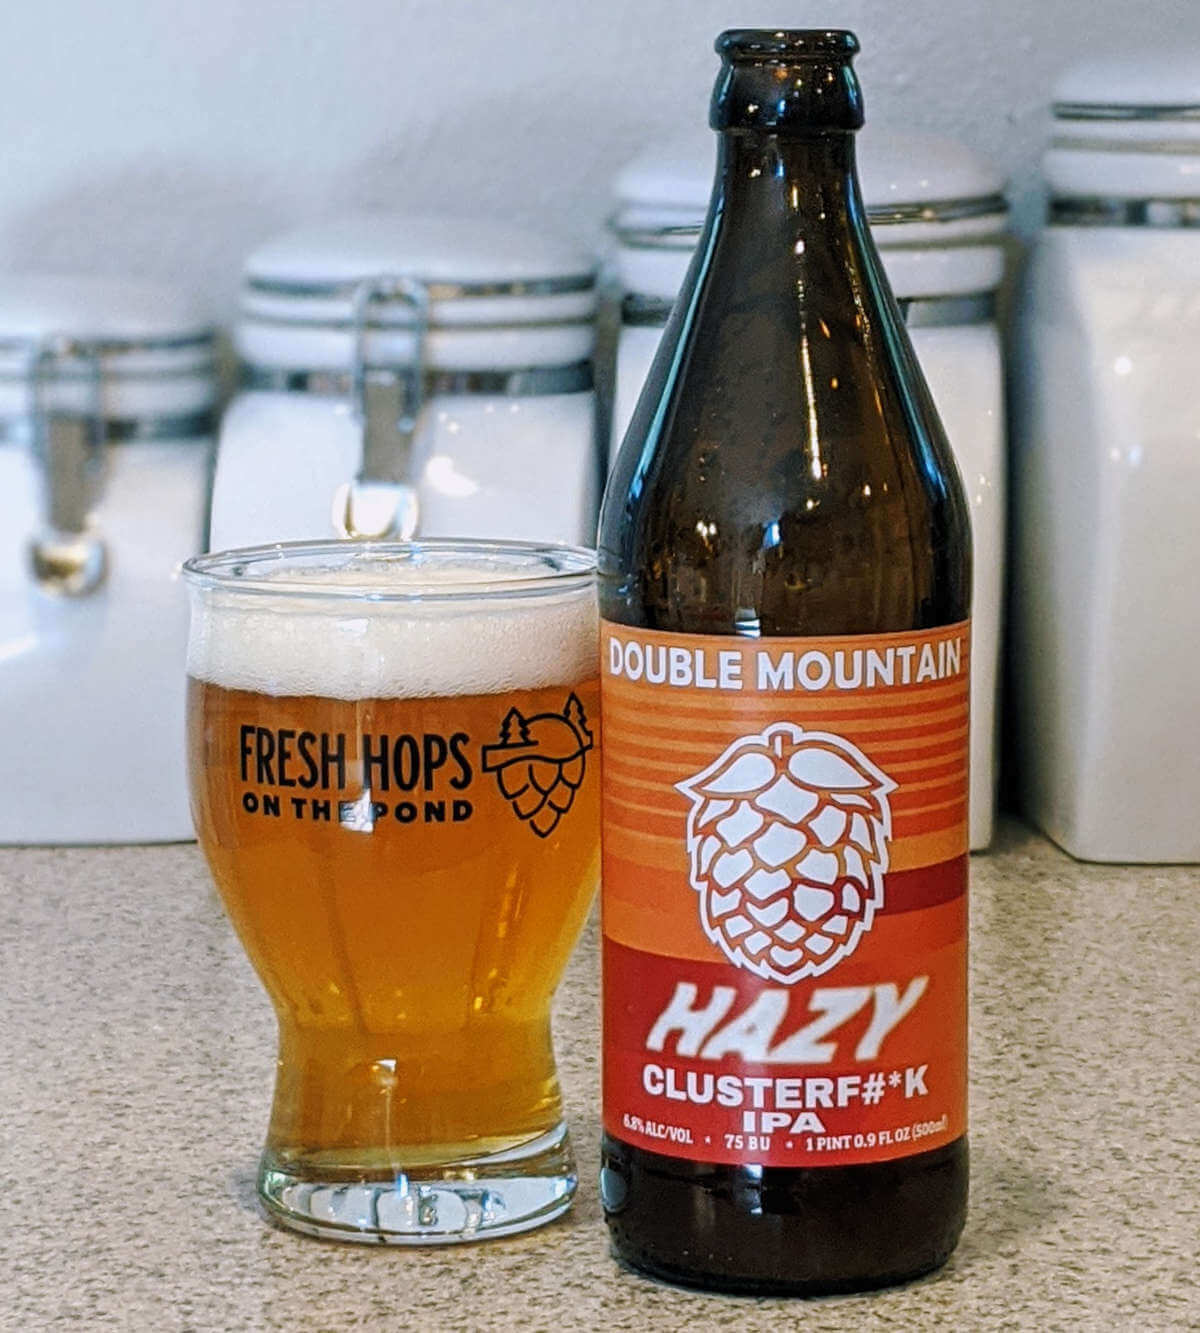 Double Mountain Hazy Clusterf#*k IPA (perfect for these times?)